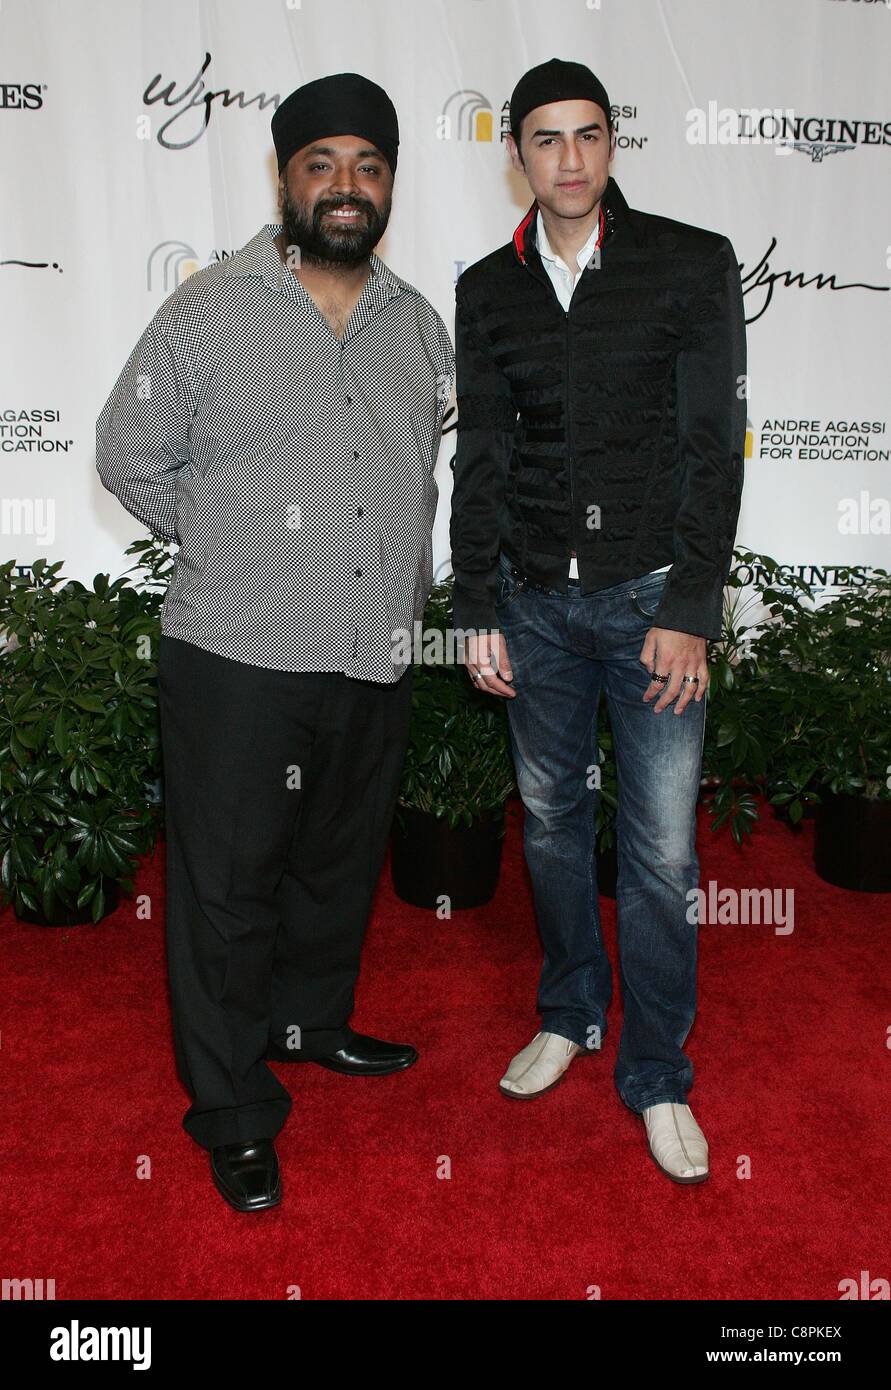 Madhu Singh, Suleman Mirza at arrivals for 16th Andre Agassi Grand Slam for Children Benefit Concert, Wynn Las Vegas, Las Vegas, NV October 29, 2011. Photo By: James Atoa/Everett Collection Stock Photo